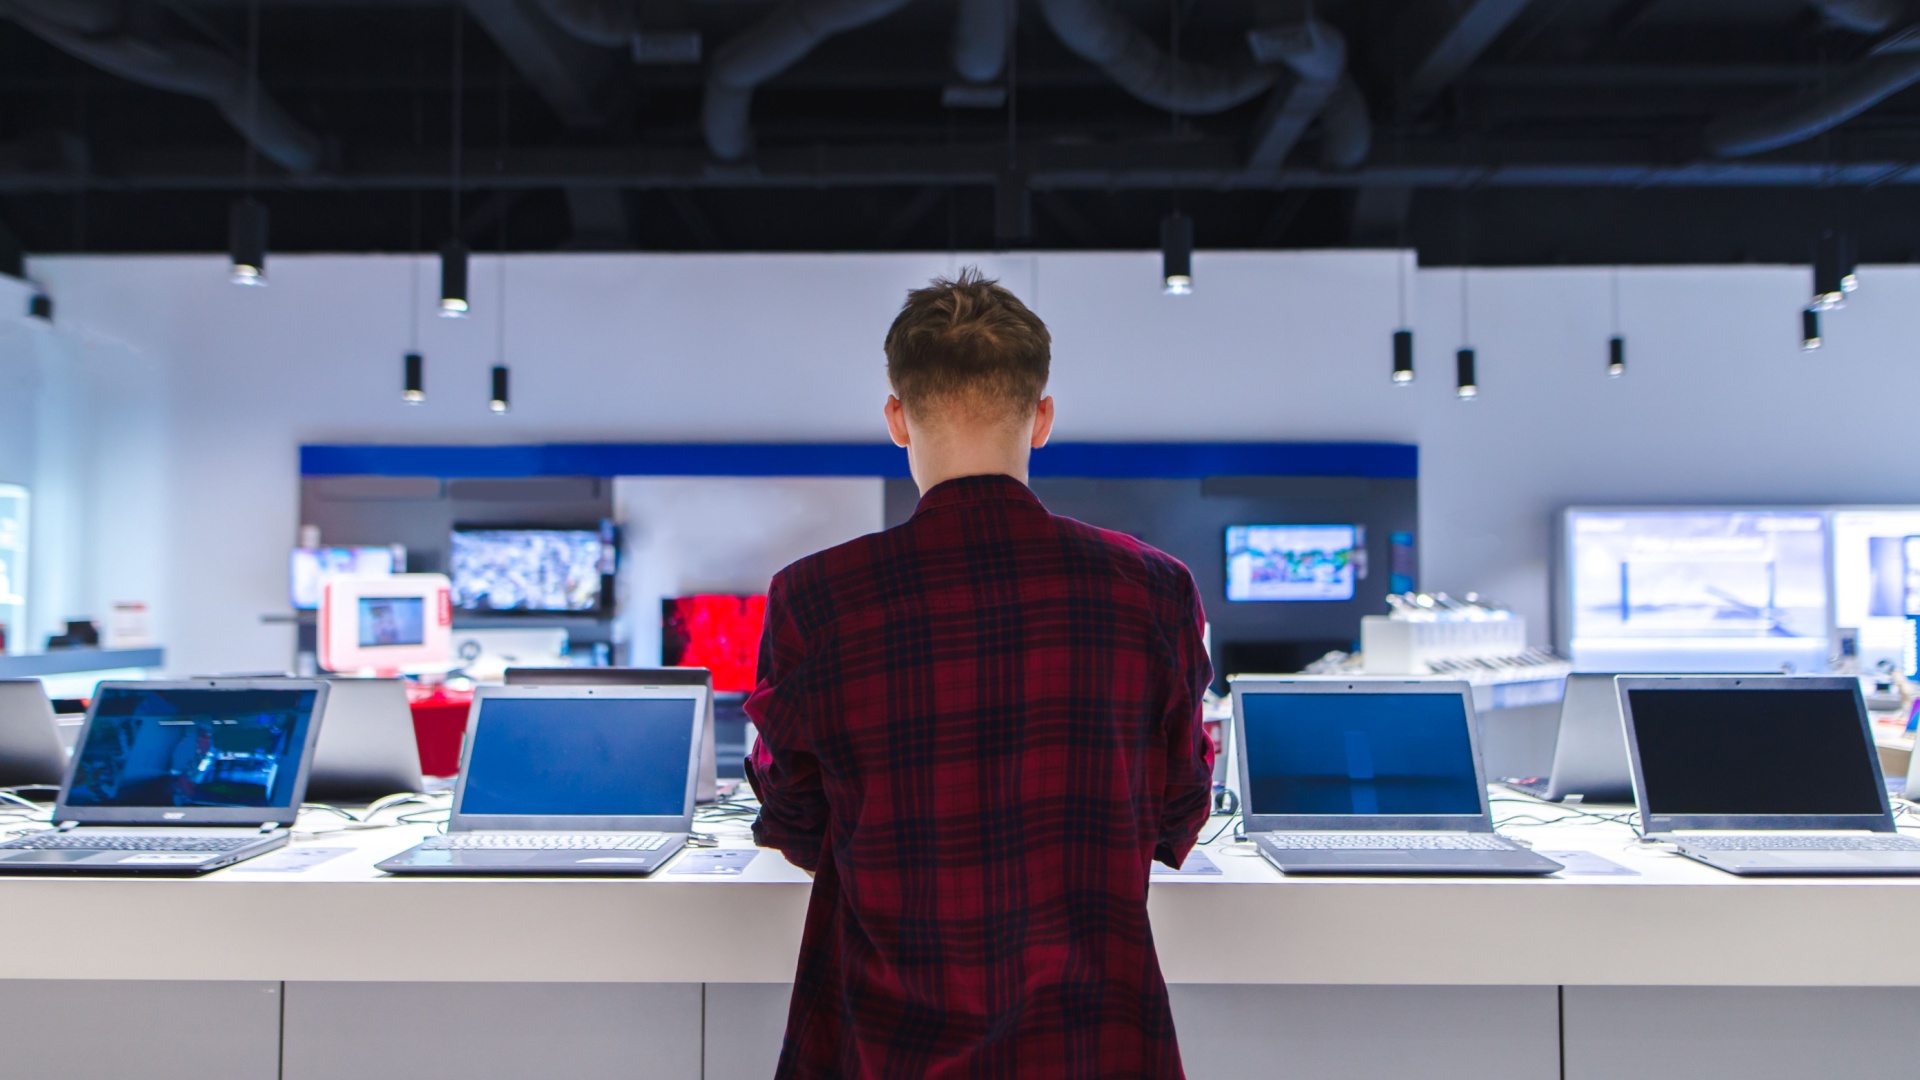 man standing in front of several laptops